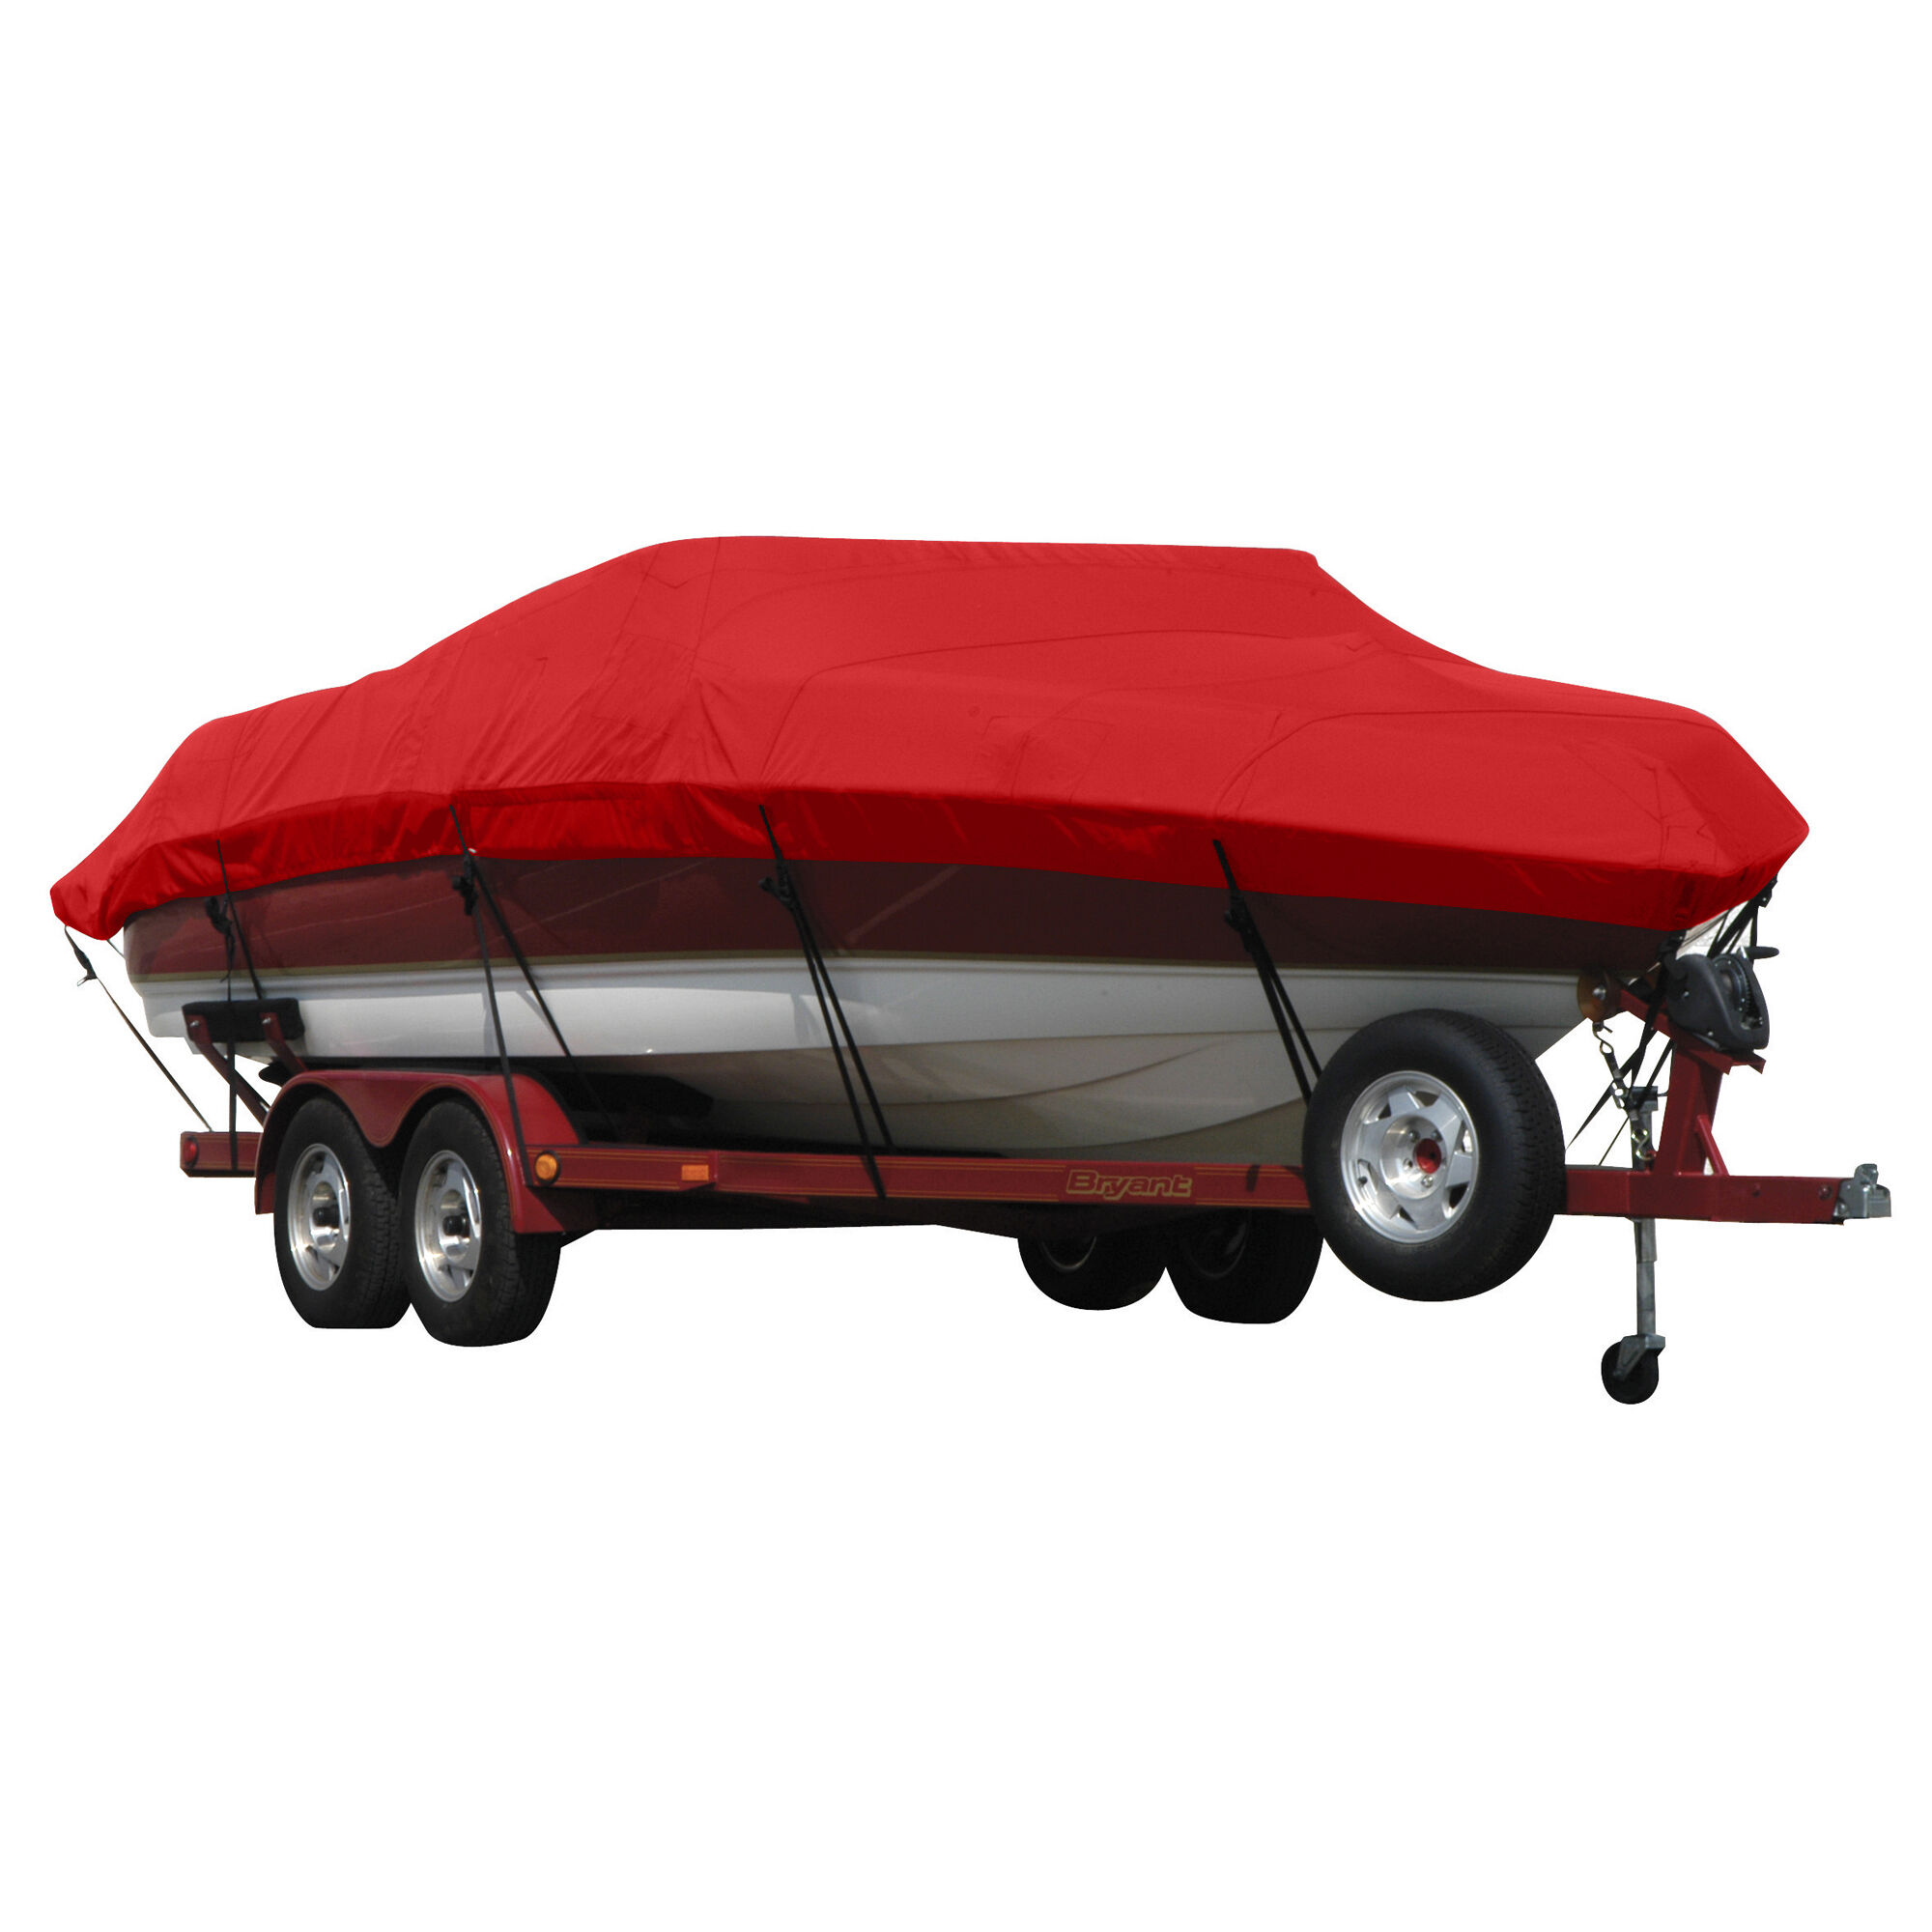 Covermate Exact Fit Sunbrella Boat Cover for Cobalt 303 303 Cruiser w/ Arch Cutouts Covers Extended Swim Platform w/ Spot Light I/O. Jockey Red